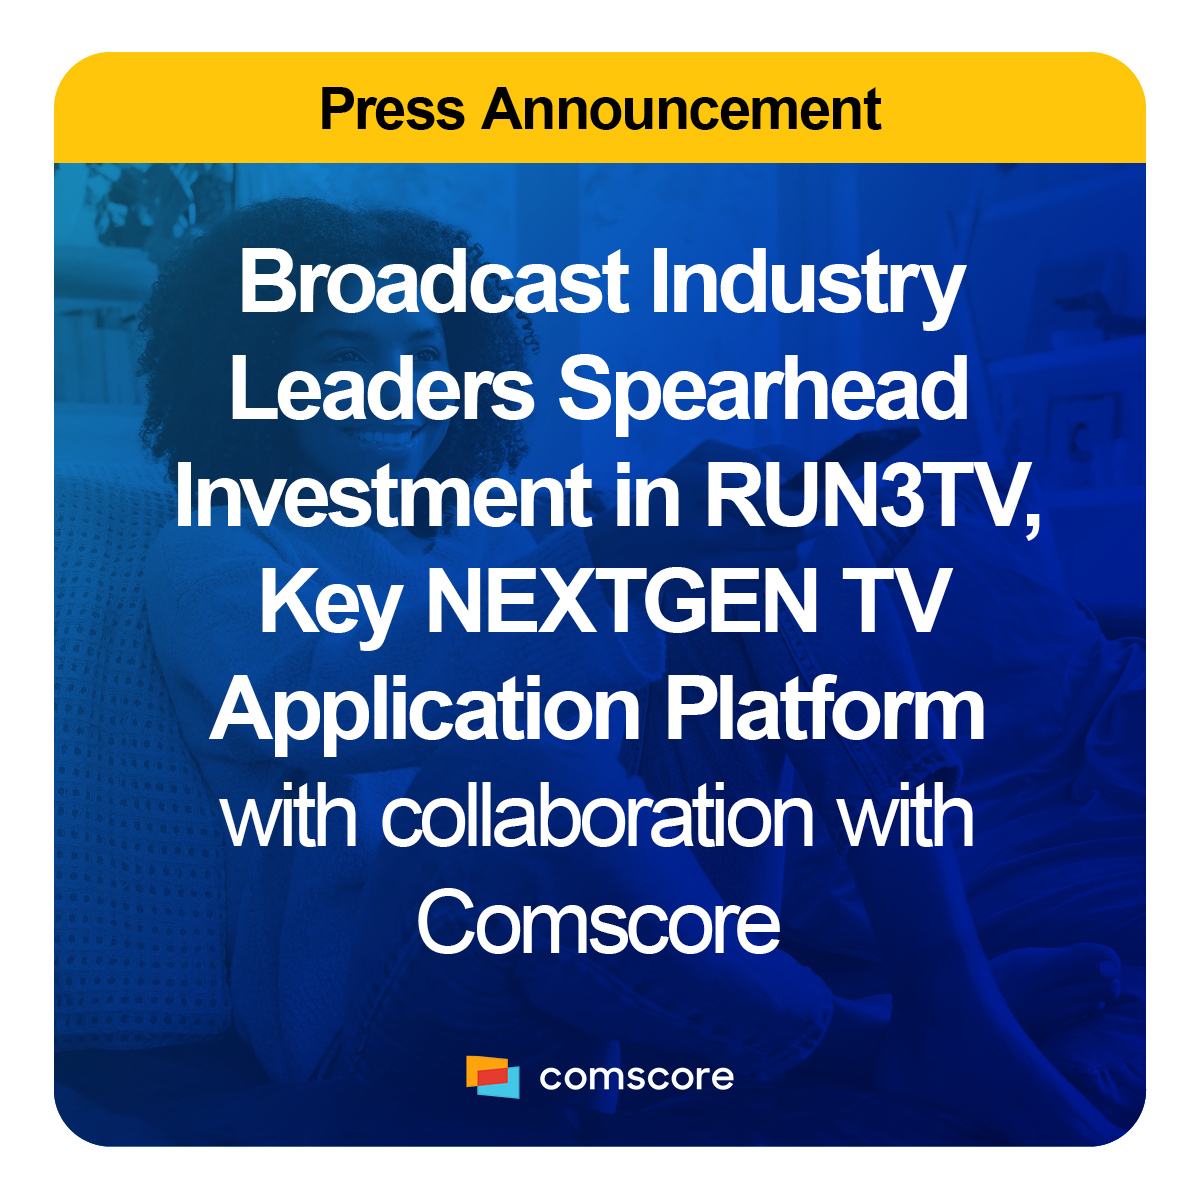 Comscore, Inc. is proud to be collaborating with the nation's leading broadcast groups on the new RUN3TV platform. Pearl TV has been instrumental in advancing the NEXTGEN TV broadcasting ecosystem.